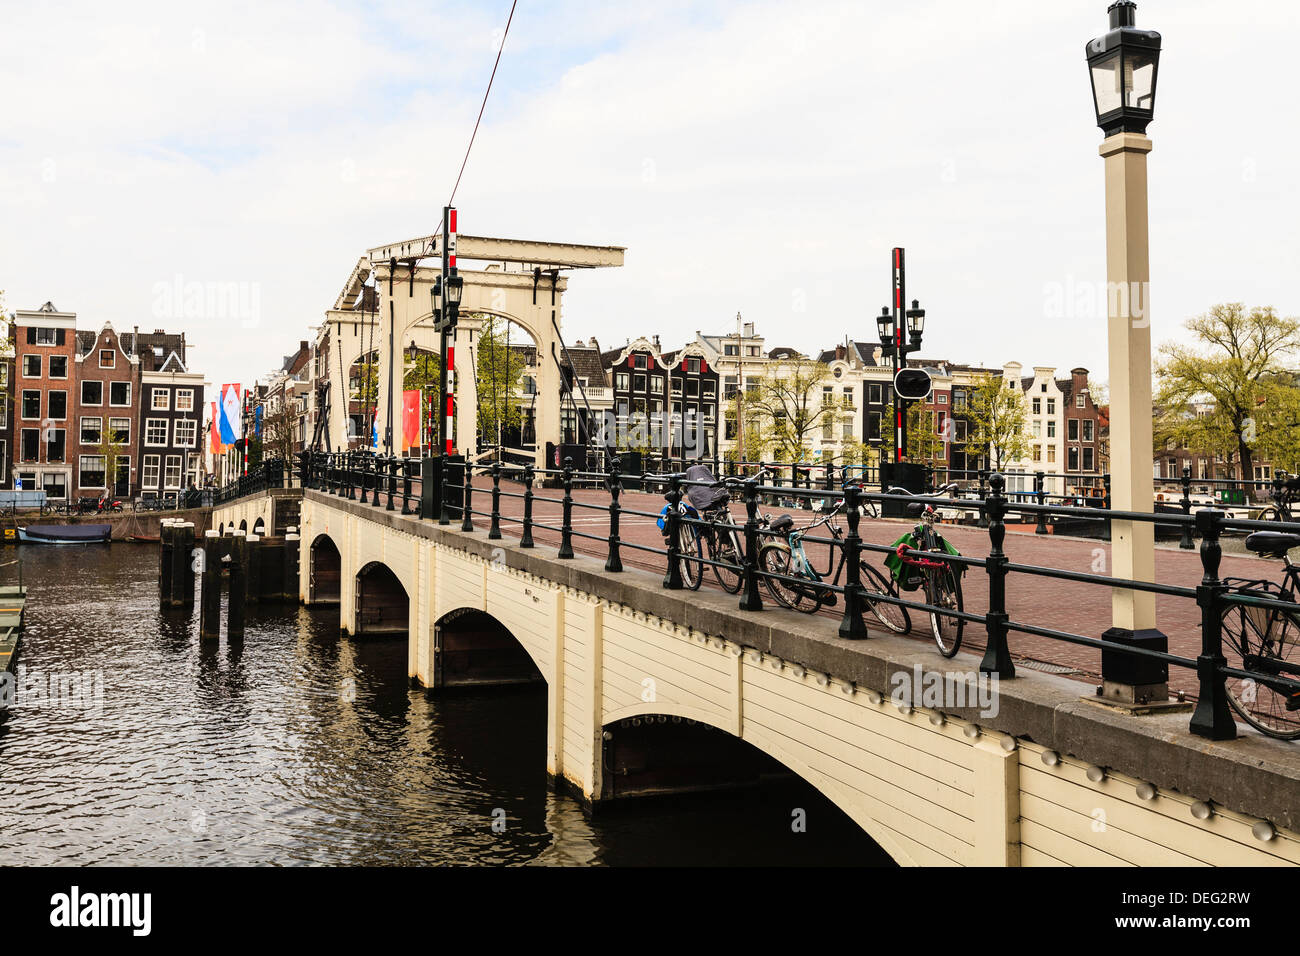 Magere Brug (The Skinny Bridge), Amsterdam, Pays-Bas, Europe Banque D'Images